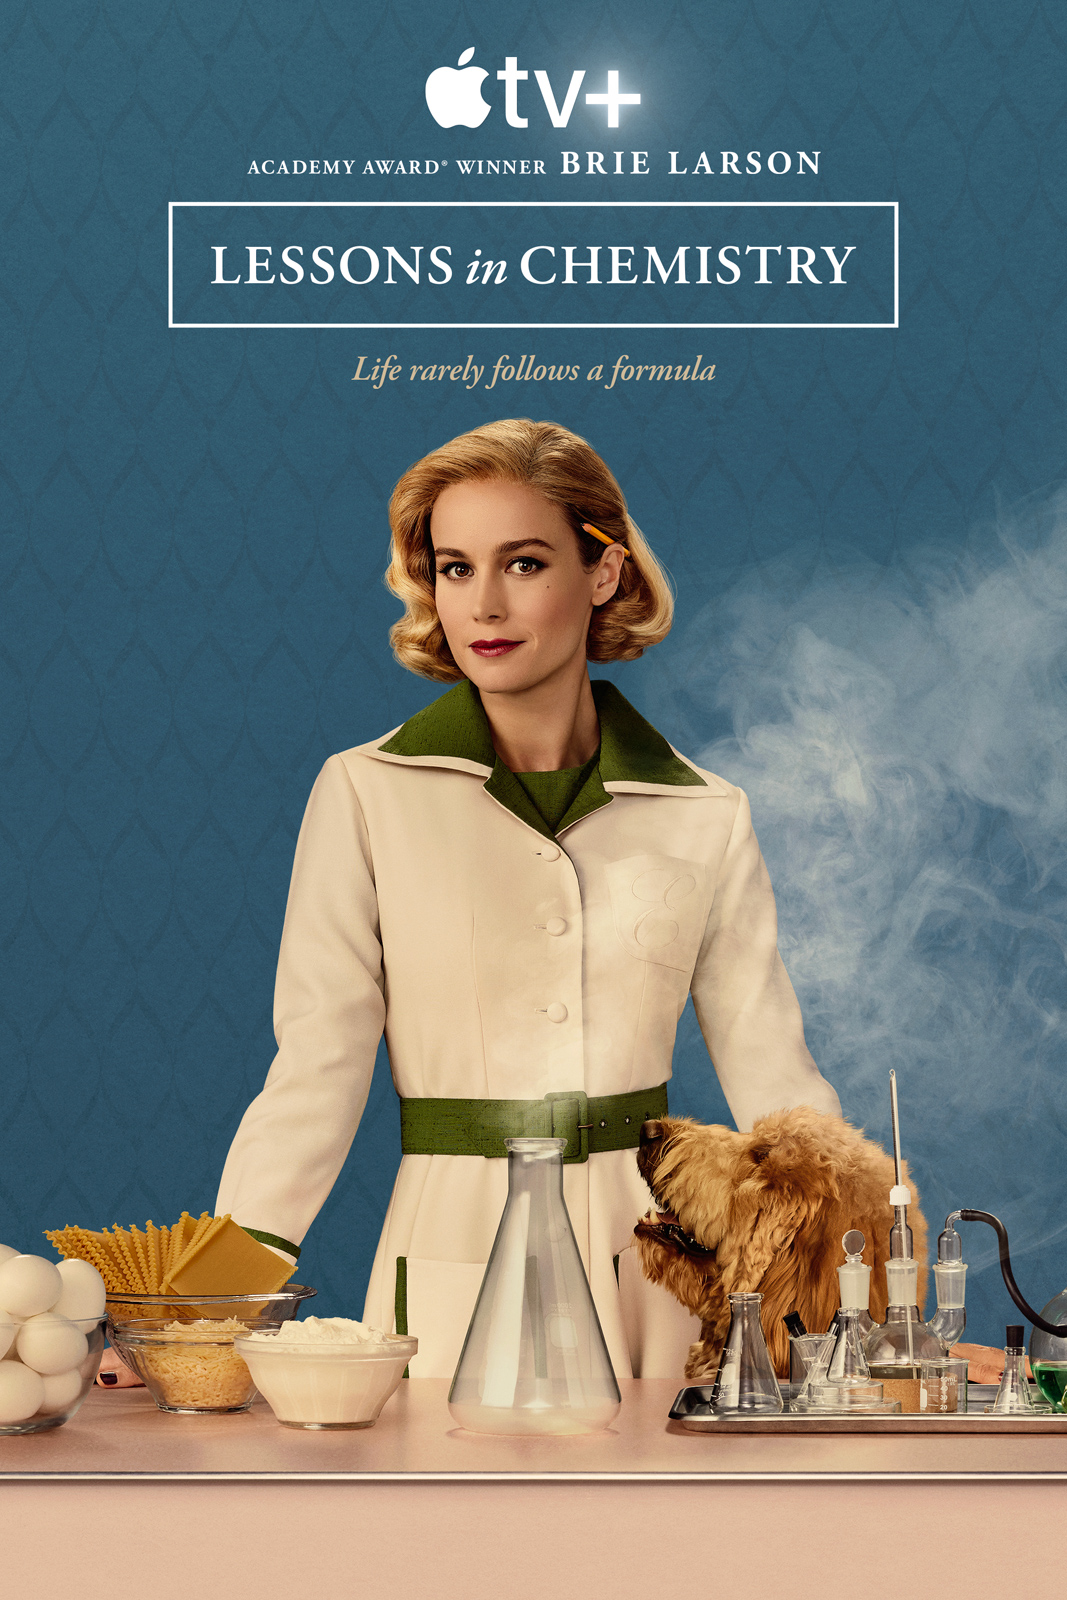 Voir Film Lessons In Chemistry - Série TV 2023 streaming VF gratuit complet